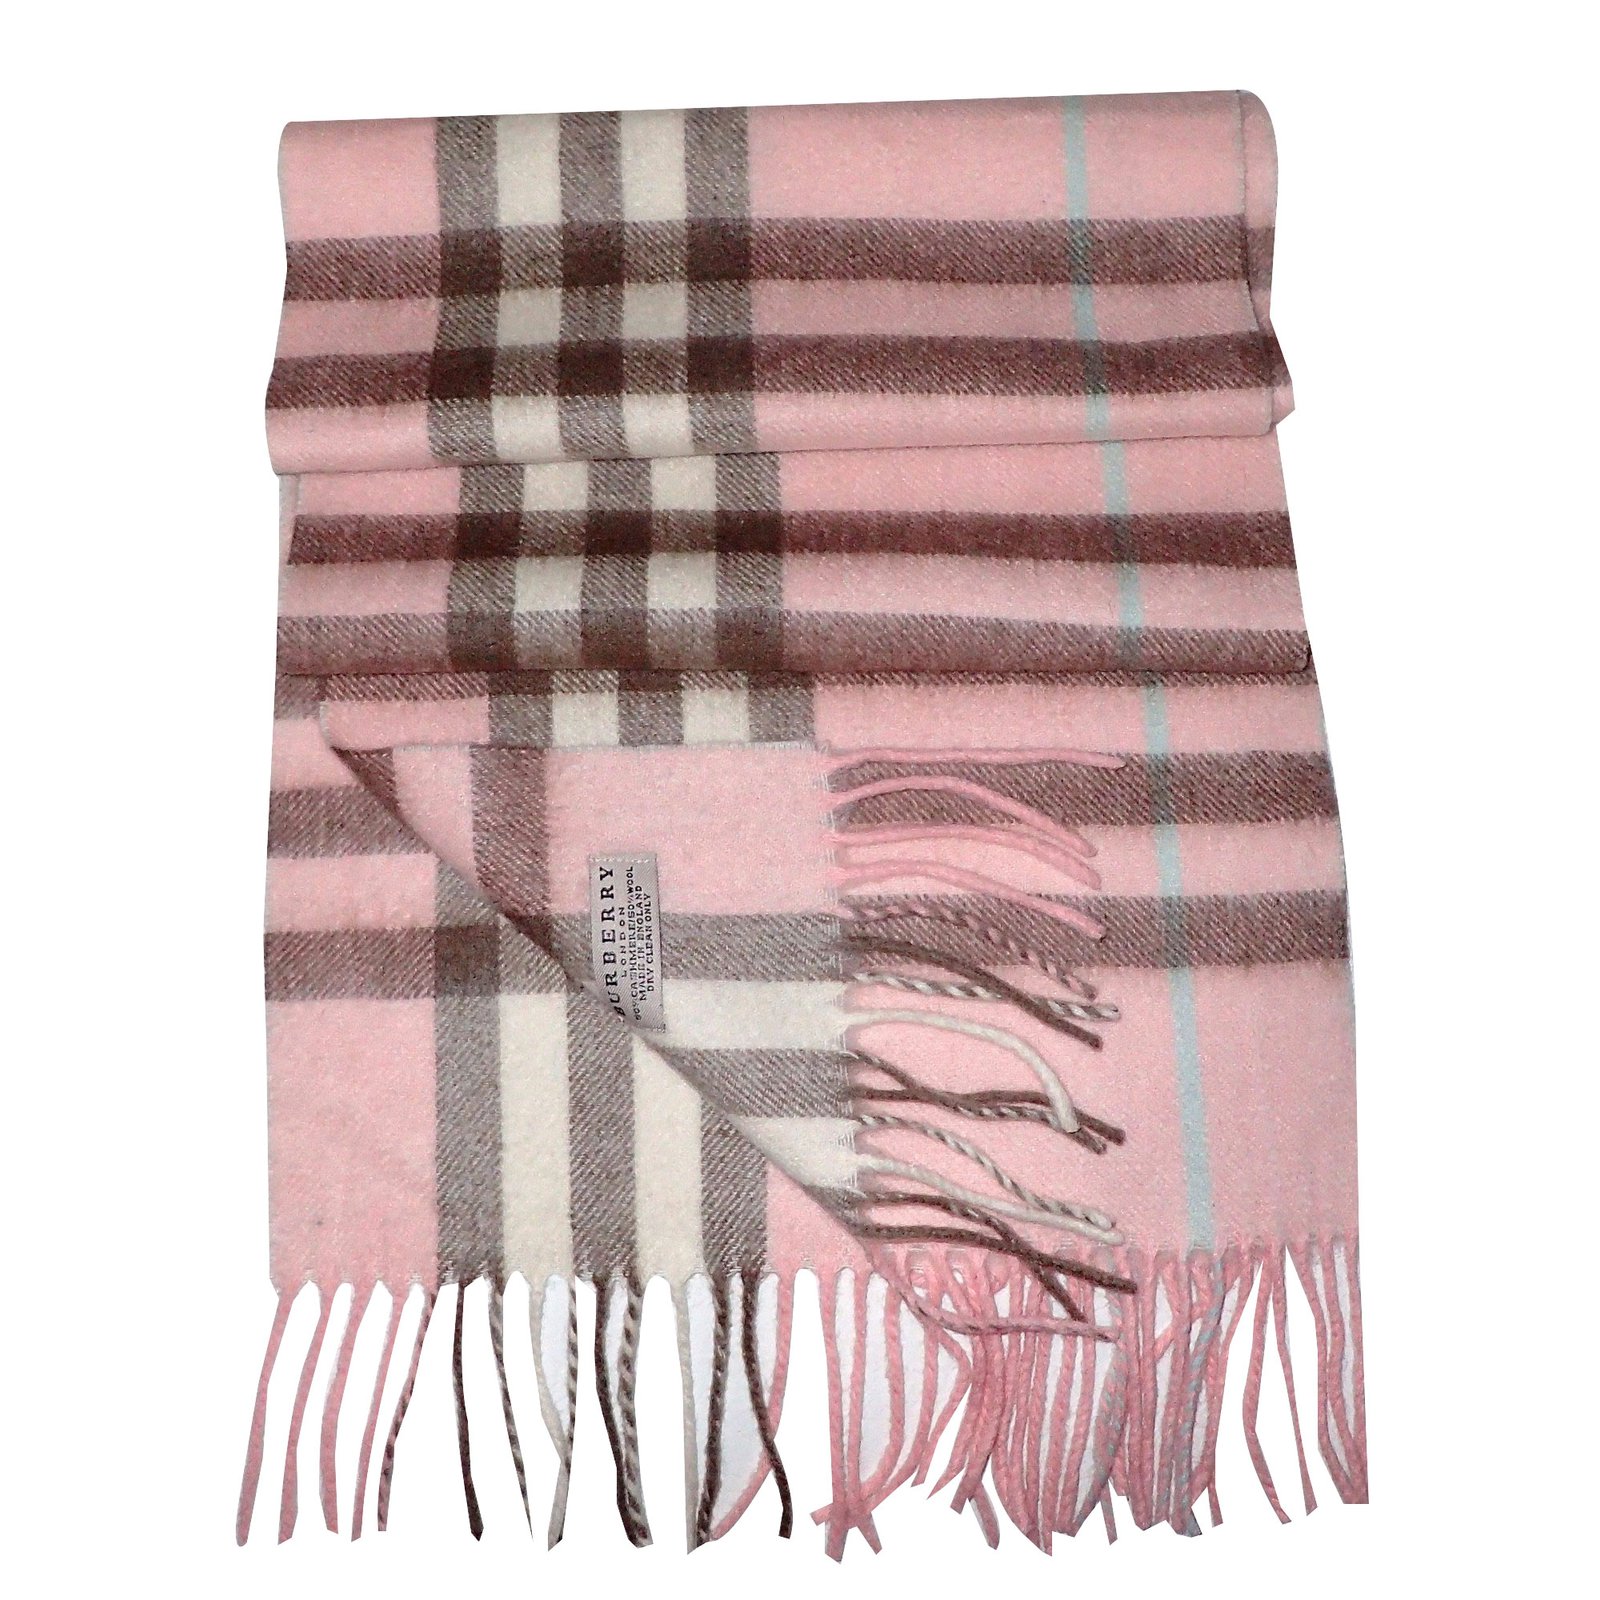 burberry pink scarf